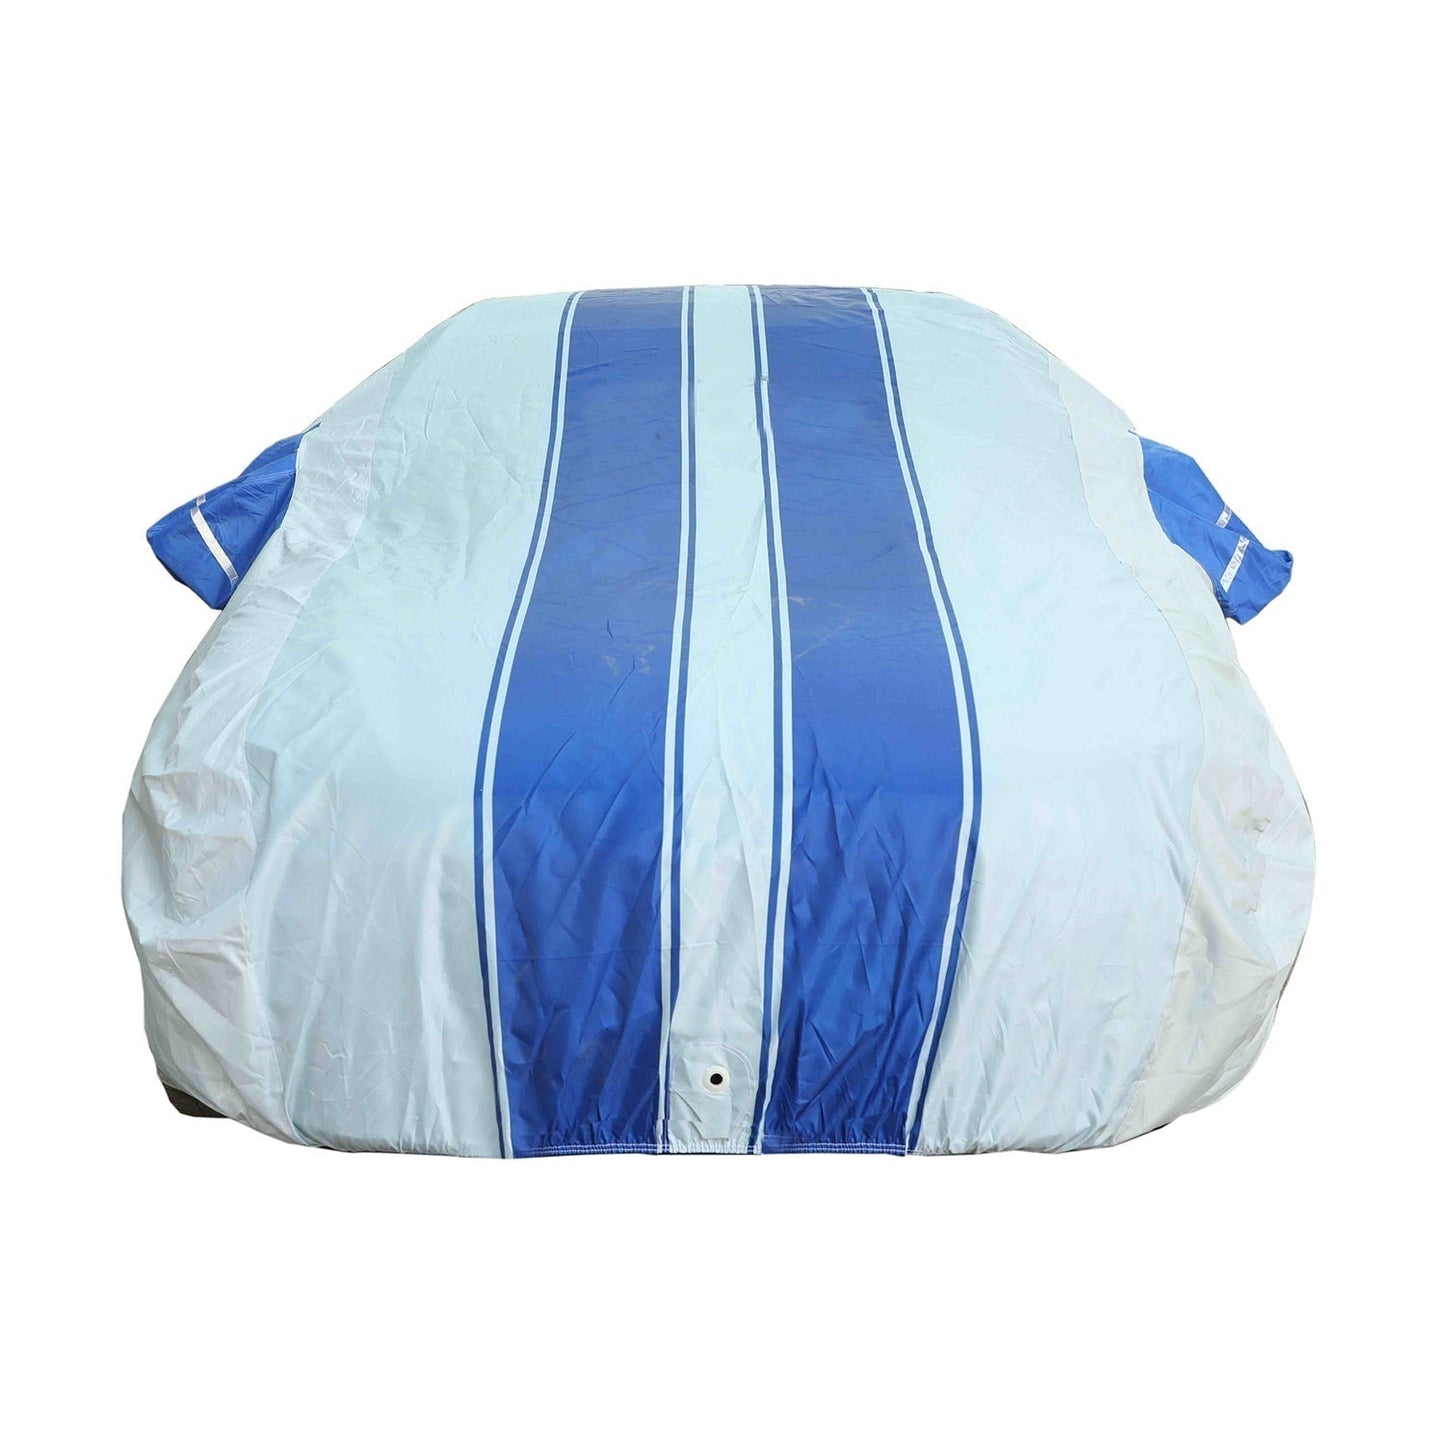 Oshotto 100% Blue dustproof and Water Resistant Car Body Cover with Mirror Pockets For Lexus LS